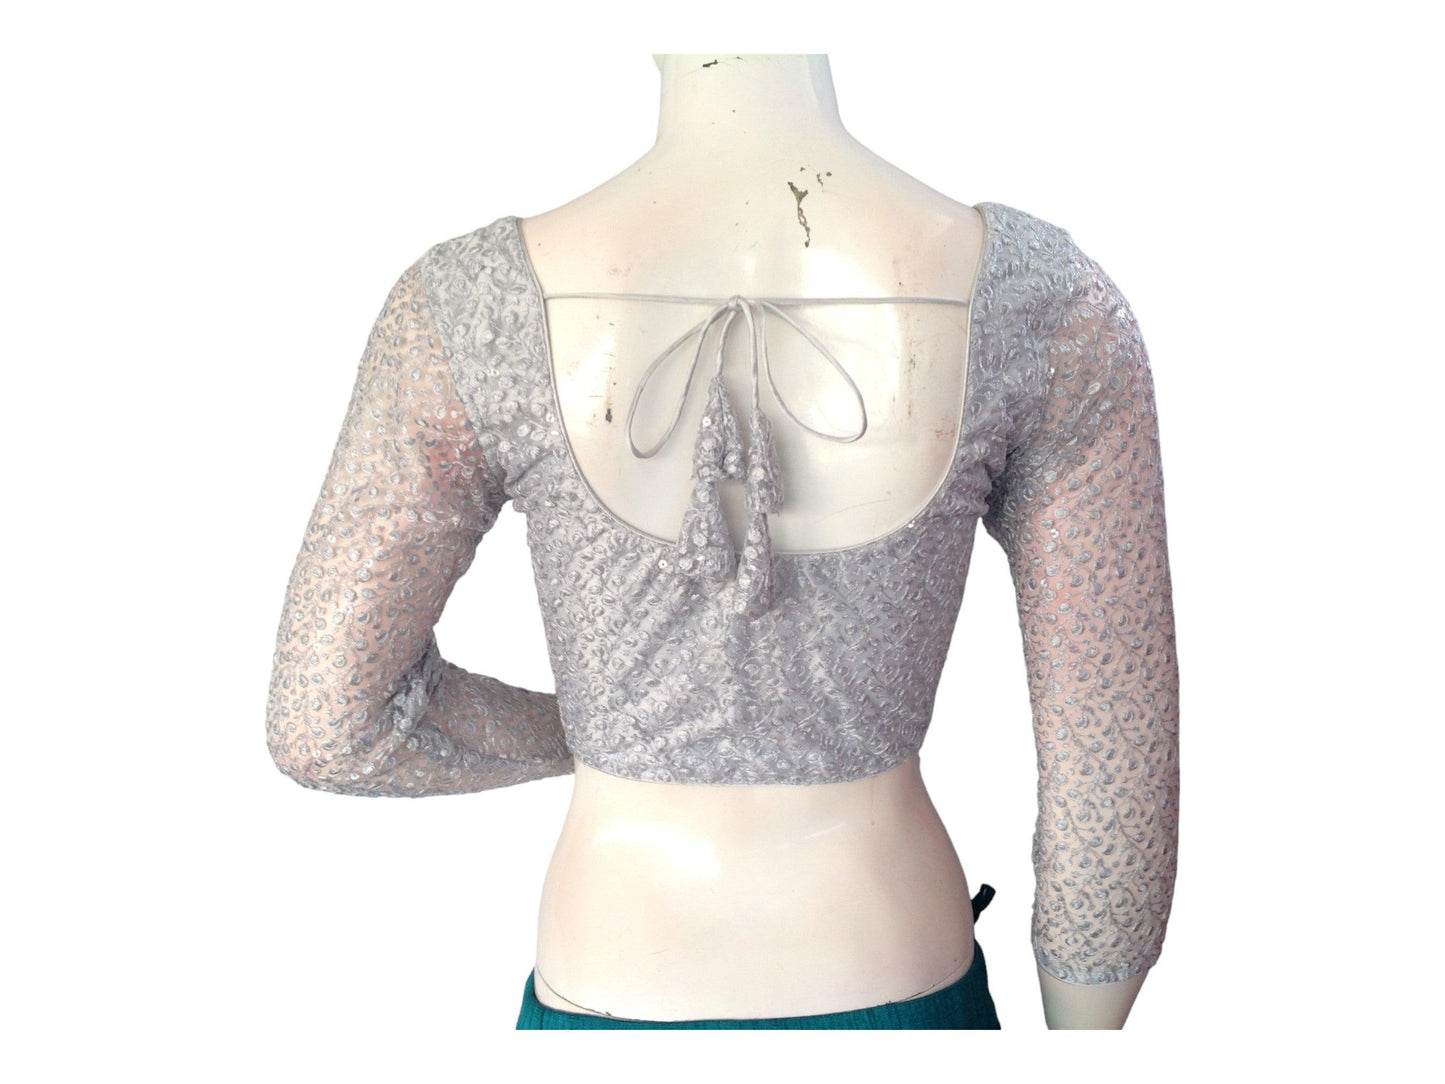 Silver Saree Blouse,3/4th sleeves Readymade Blouses, Netted sleeves Choli top